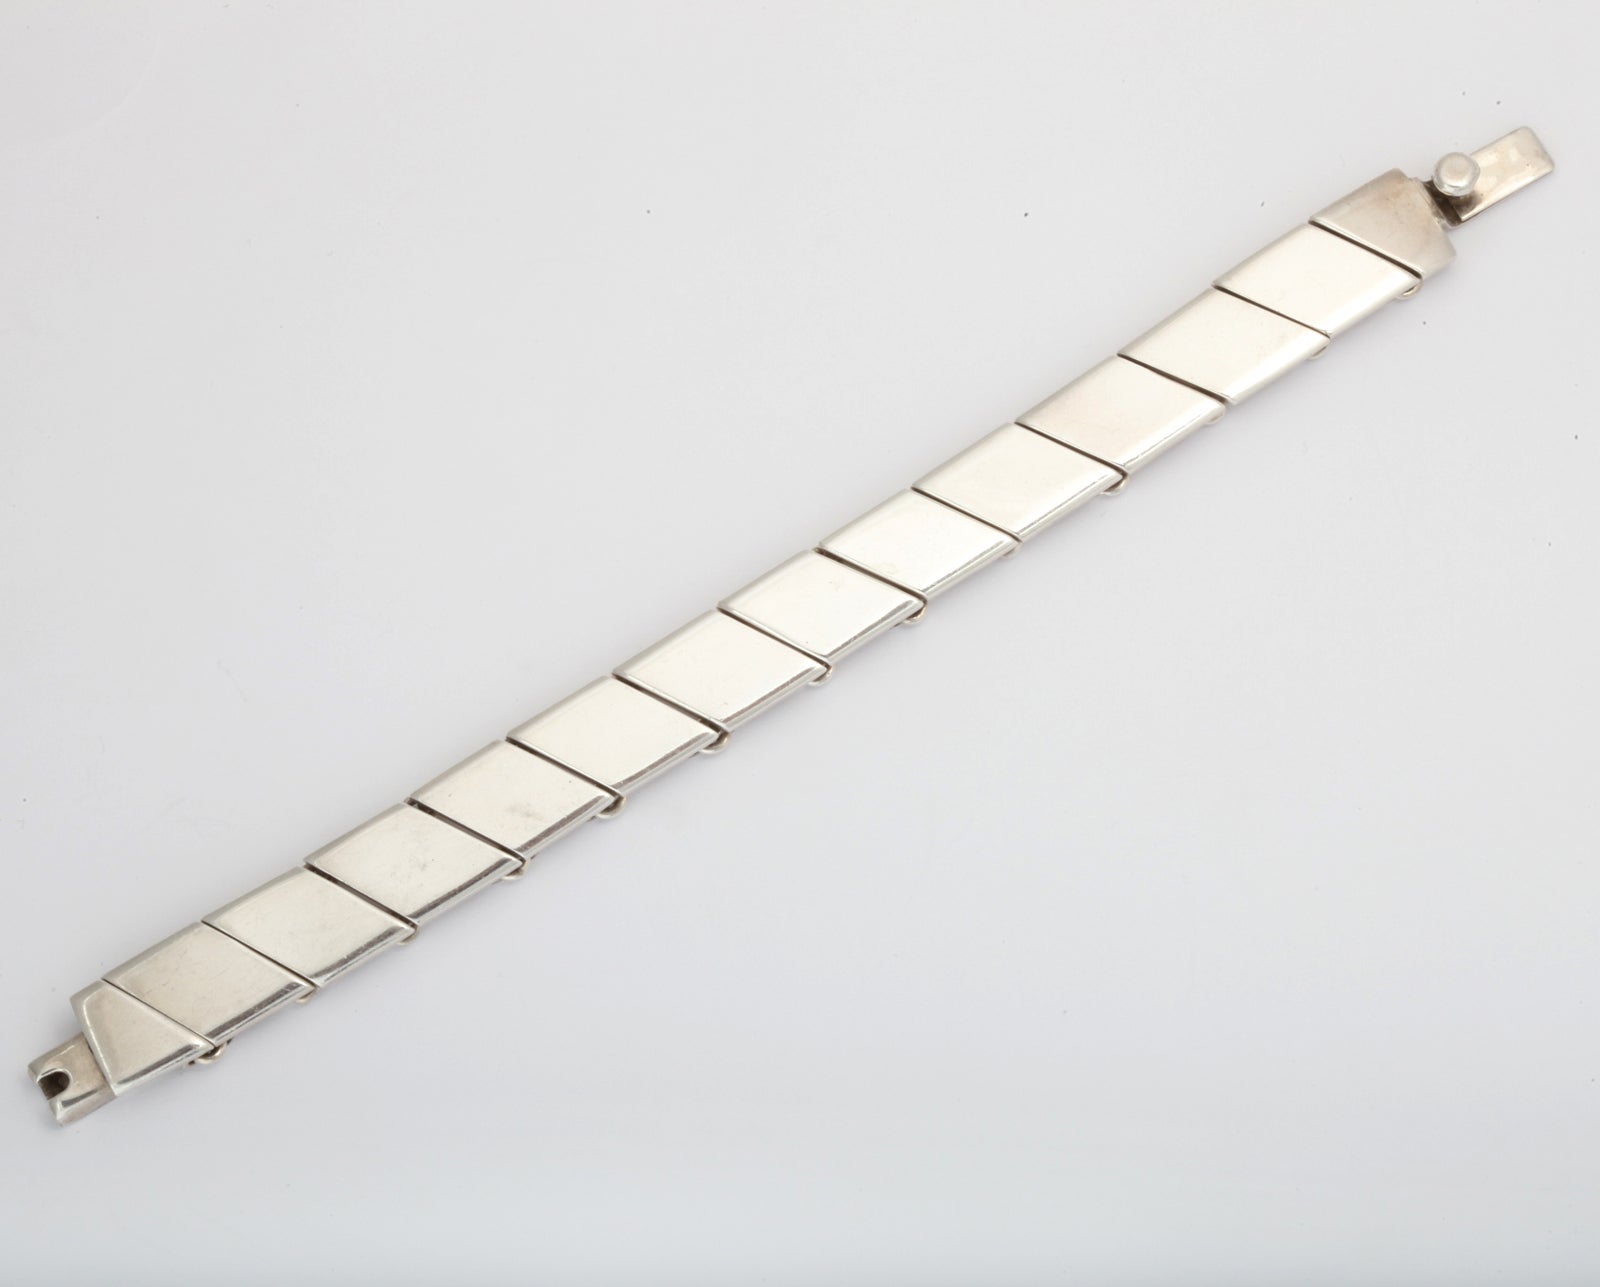 A beautiful link bracelet made up segmented diamond shaped pieces which almost appear faceted. Very simple design and sits beautifully on the wrist alone or stacked with other bracelets. Marked T5-134 for Taxco, Mexico and 925.